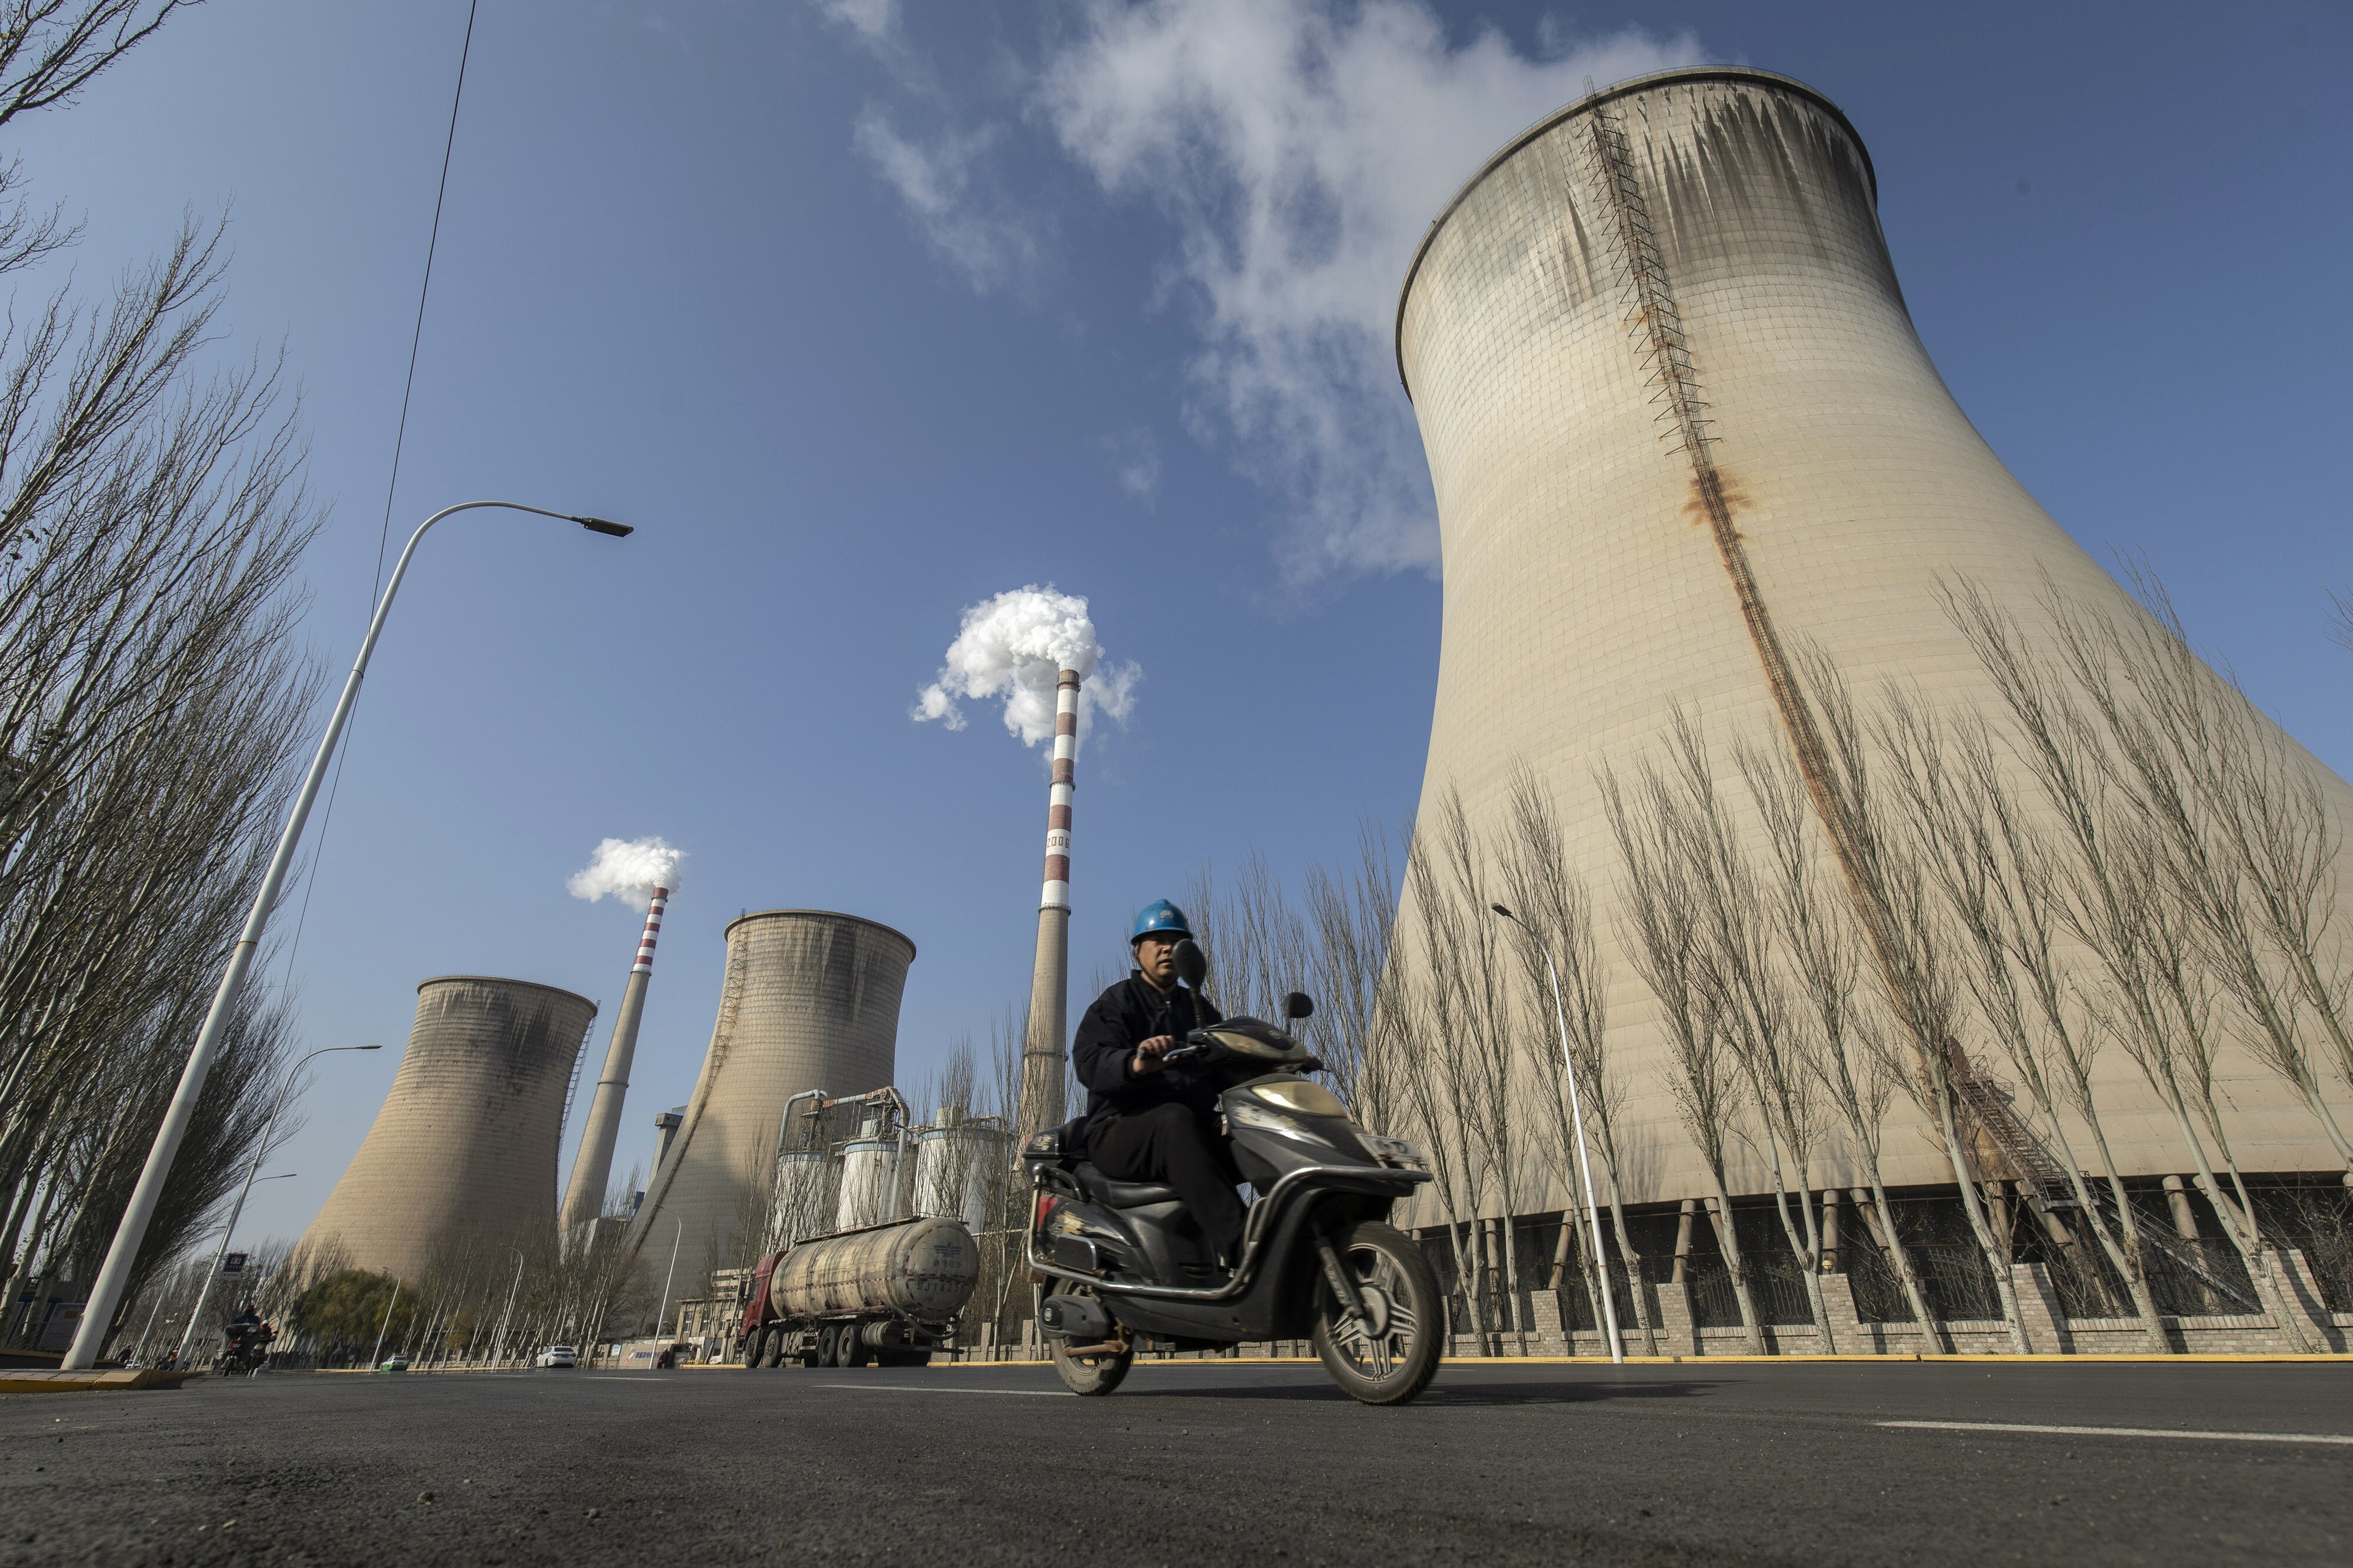 Provinces across China are struggling with the worst blackouts in nearly 10 years. Photo: Bloomberg